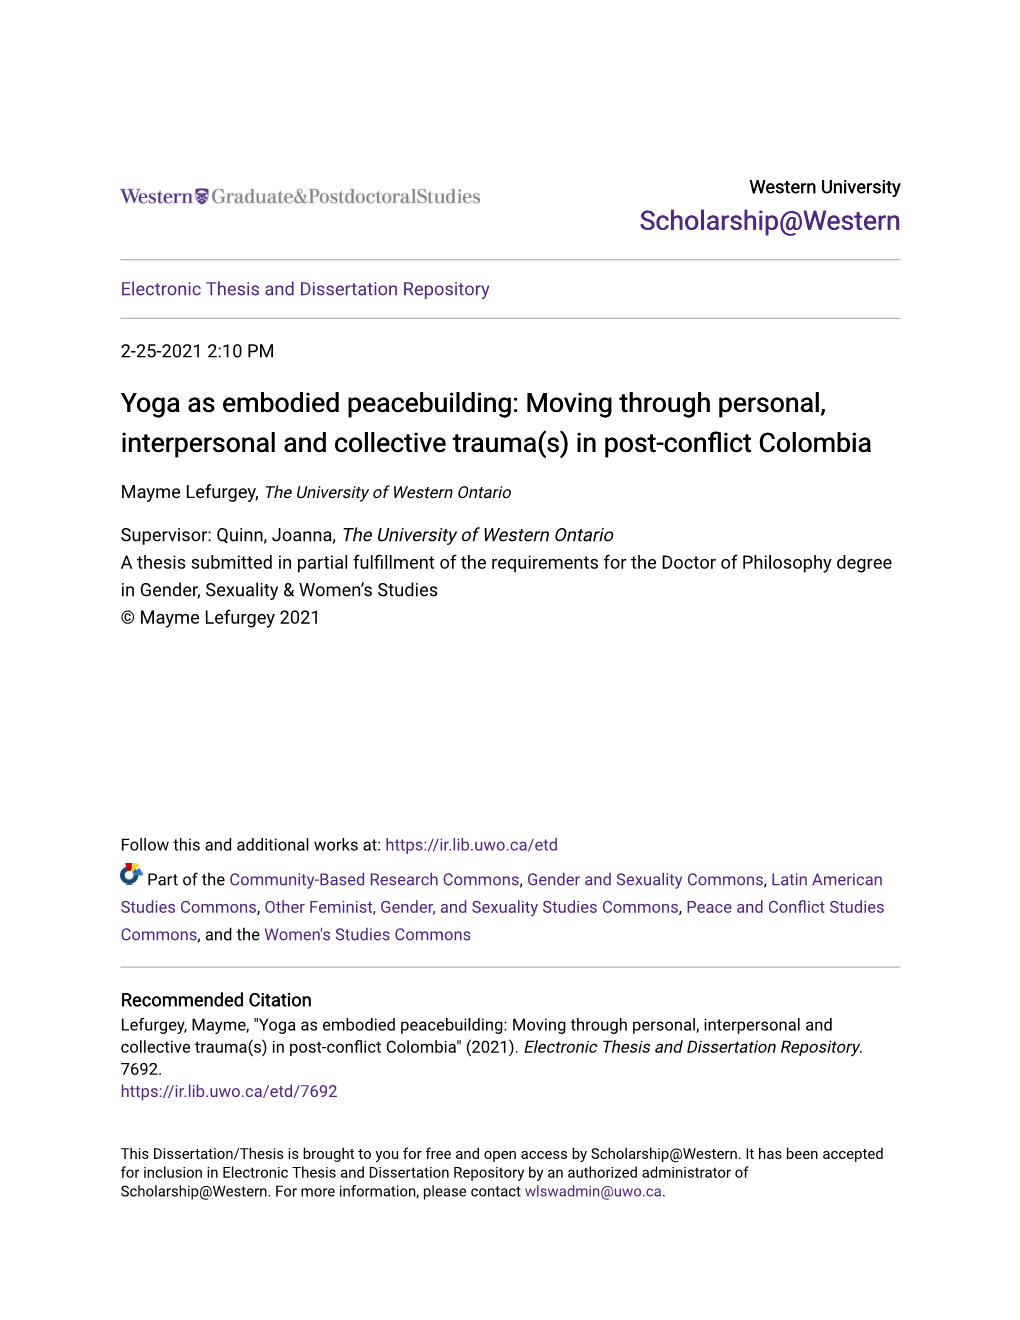 Yoga As Embodied Peacebuilding: Moving Through Personal, Interpersonal and Collective Trauma(S) in Post-Conflict Colombia